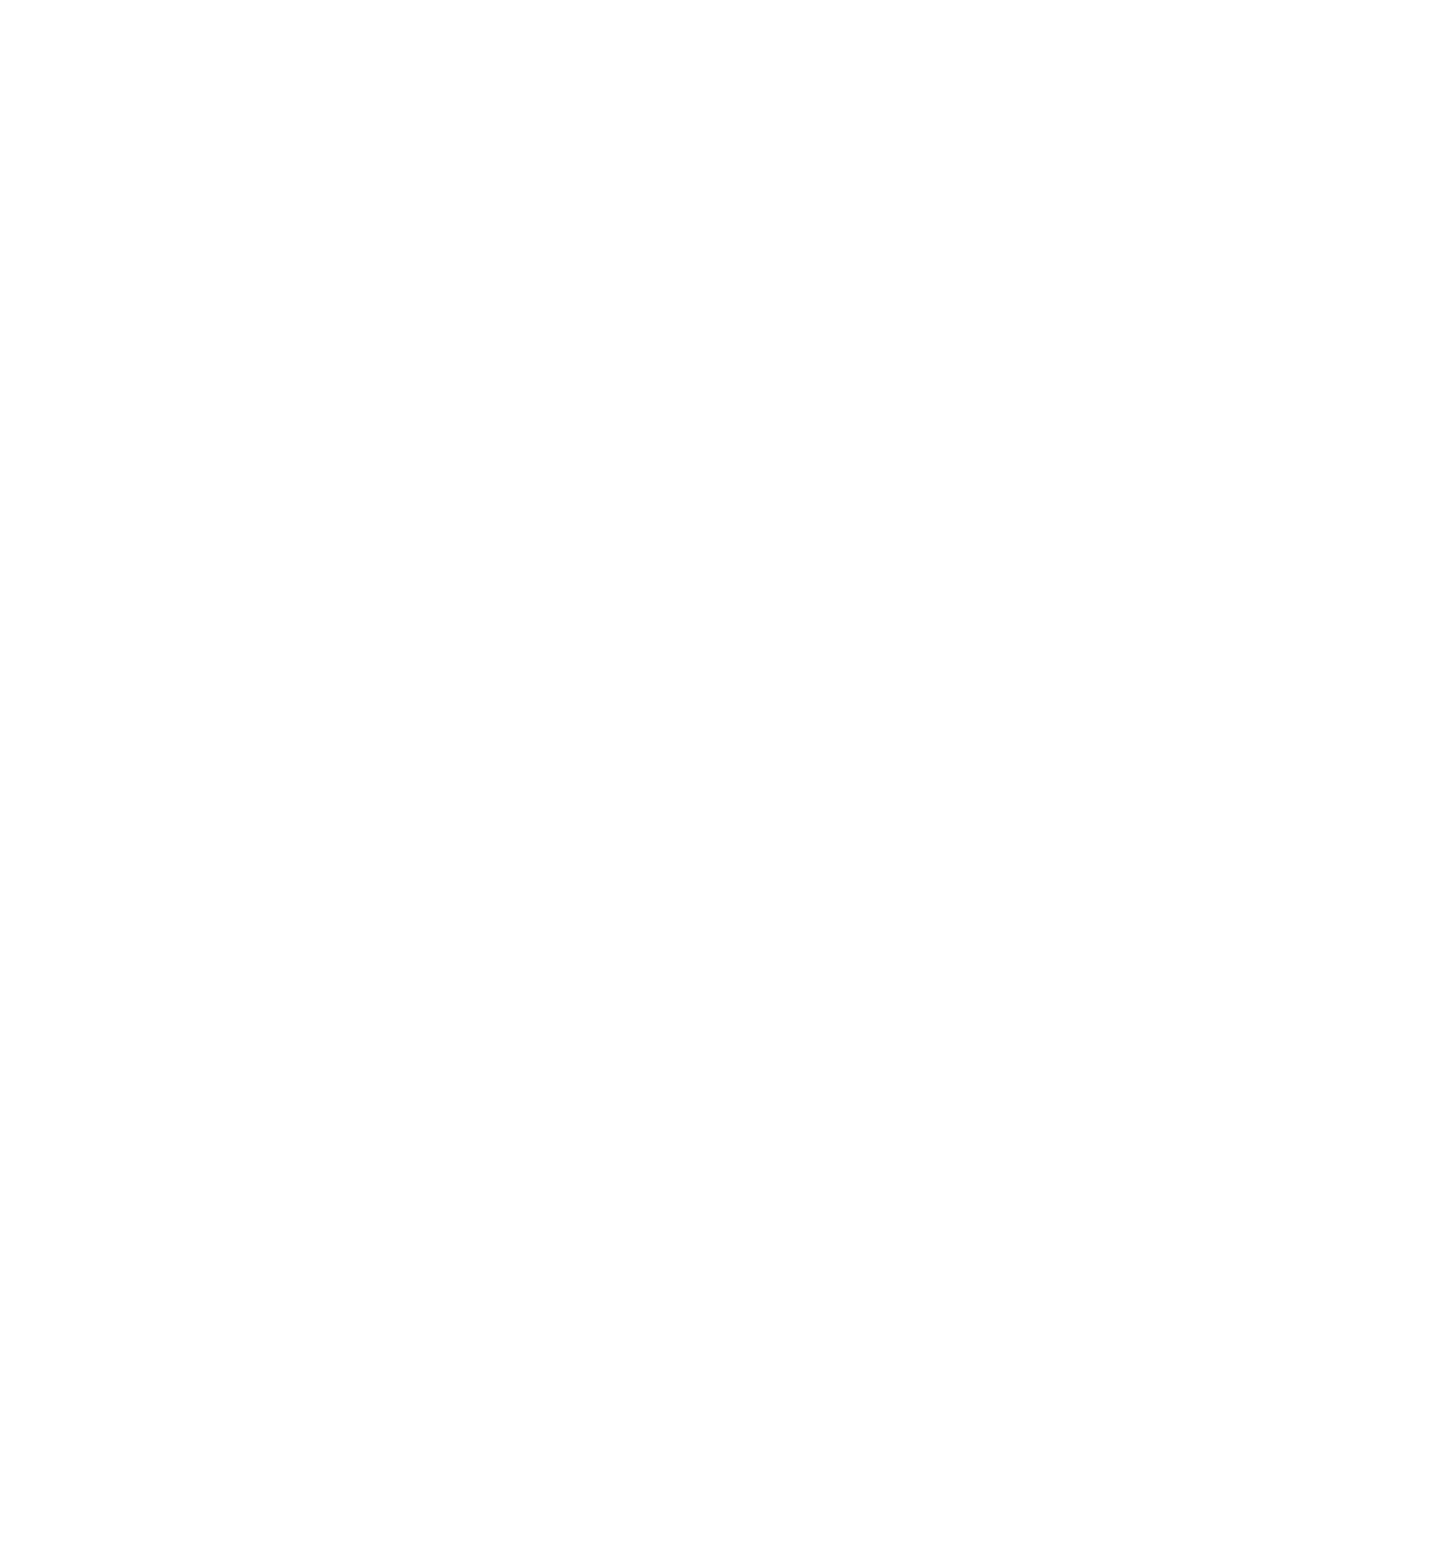 AIA logo for dark backgrounds (transparent PNG)